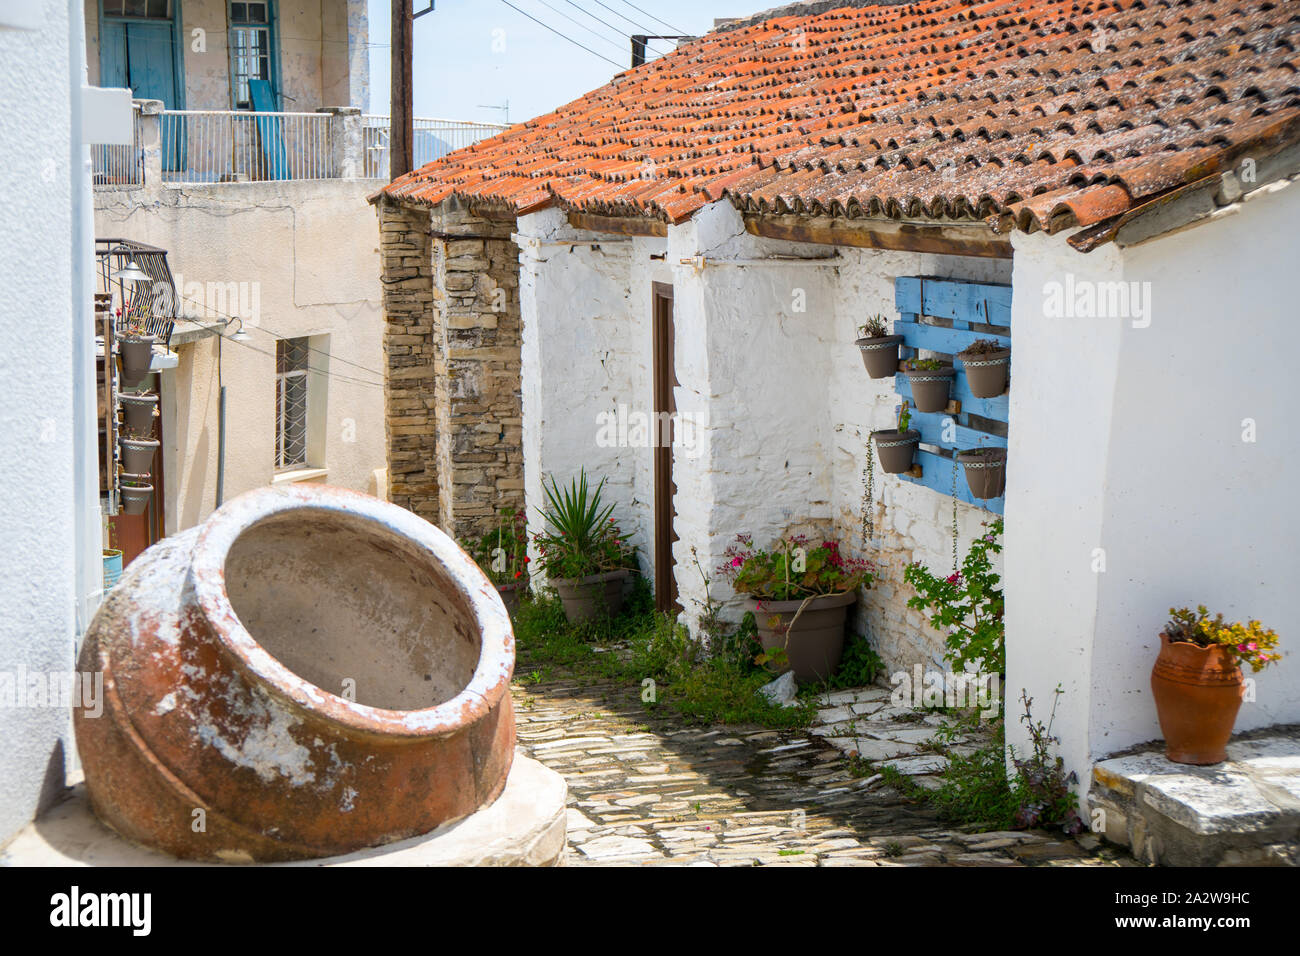 Old Village in Cyprus with historic buildings Stock Photo